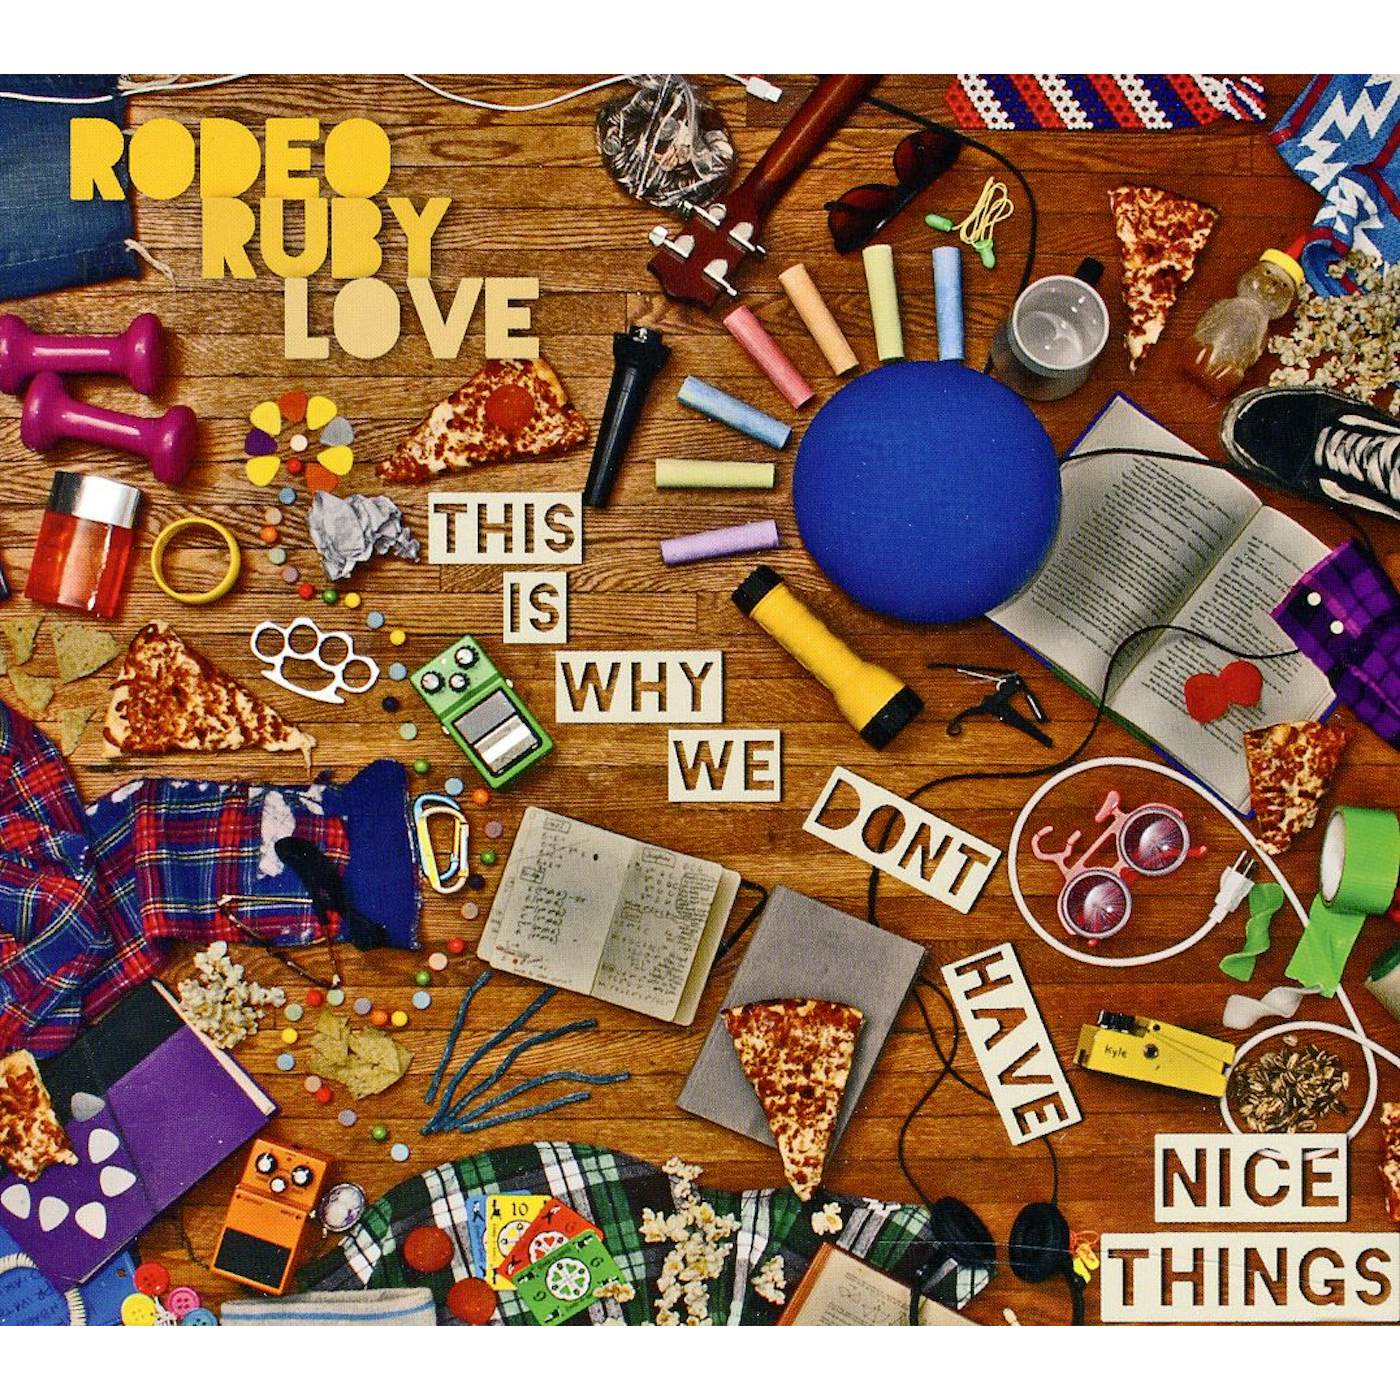 Rodeo Ruby Love THIS IS WHY WE DON'T HAVE NICE THINGS CD